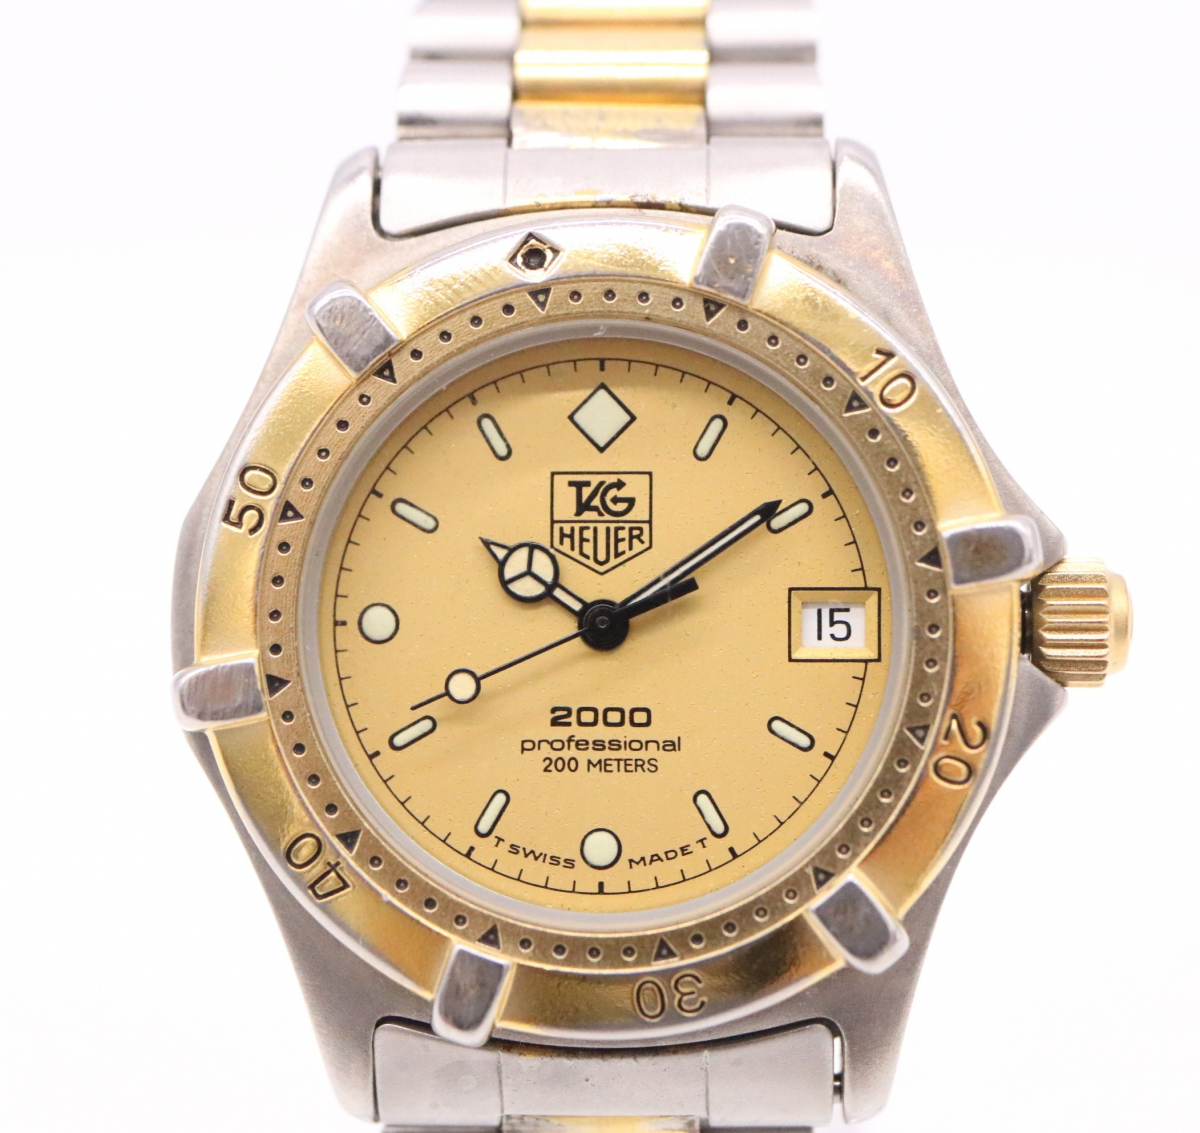 [to.]TAGHEUER TAG Heuer Professional 200M 2000 Date Gold face 964.013 boys men's wristwatch AF069DEM17